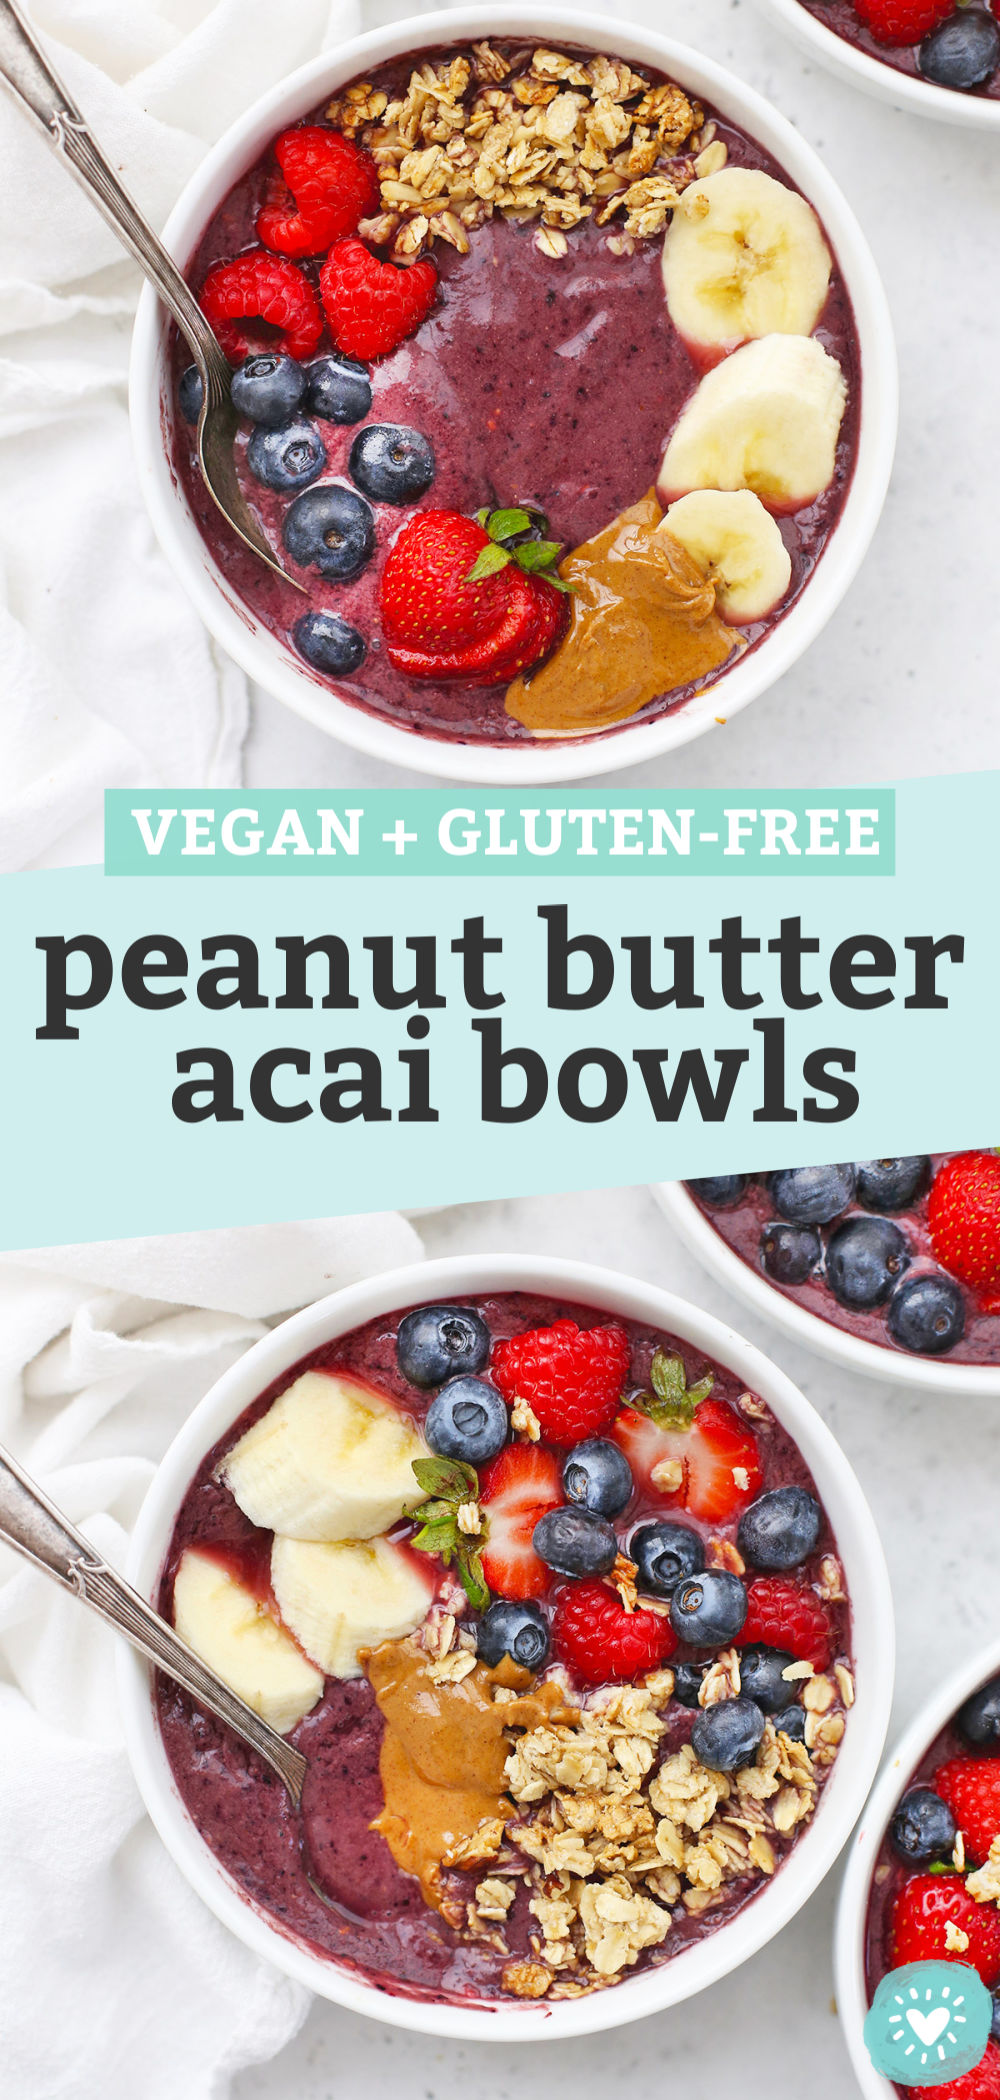 Collage of images of peanut butter acai bowls with text overlay that reads "Vegan + Gluten-Free Peanut Butter Acai Bowls"